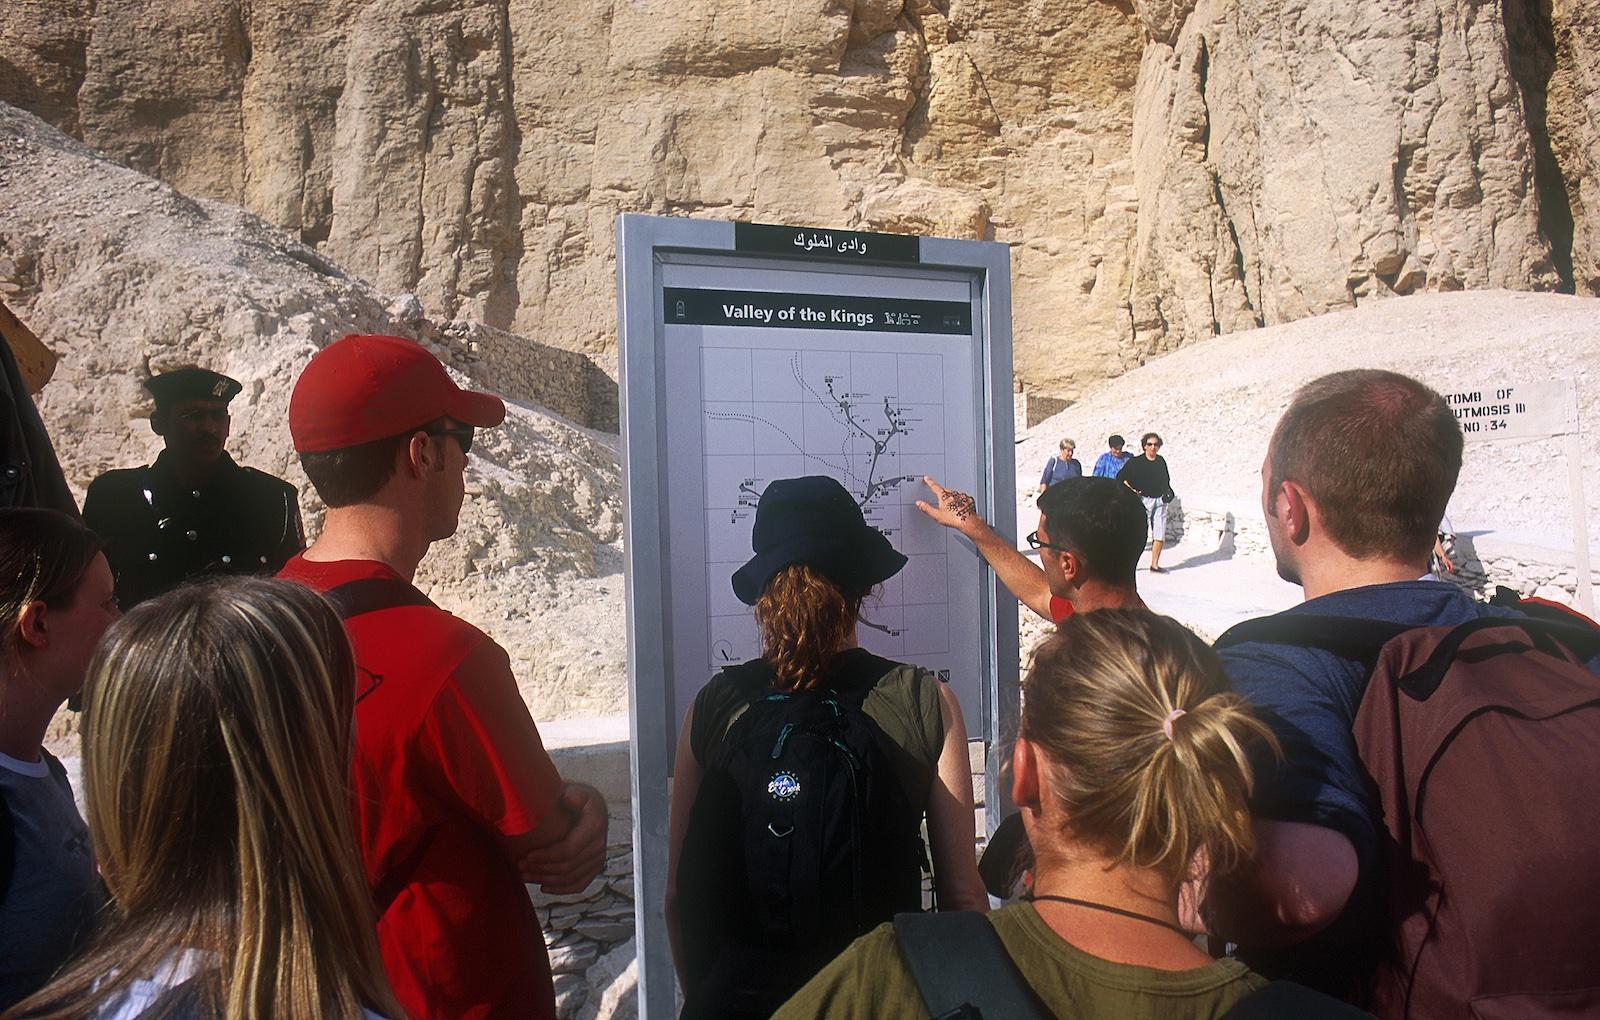 Tour guide lecturing in front of new information sign installed by the Theban Mapping Project.